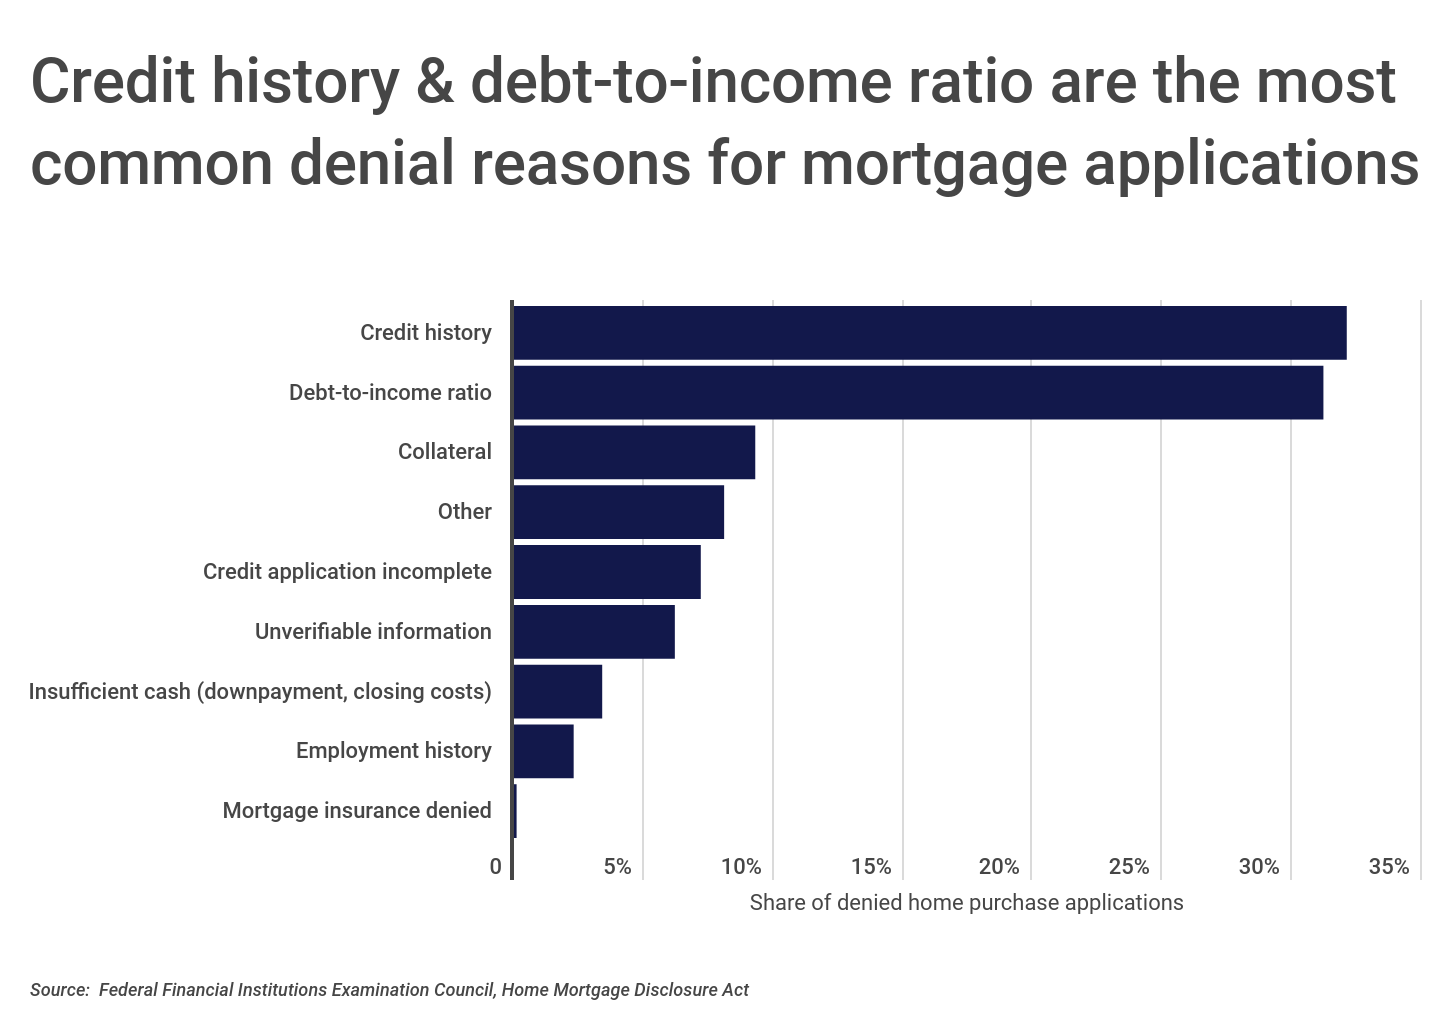 Chart1_Credit history & DTI are most common denial reasons for mortgage apps